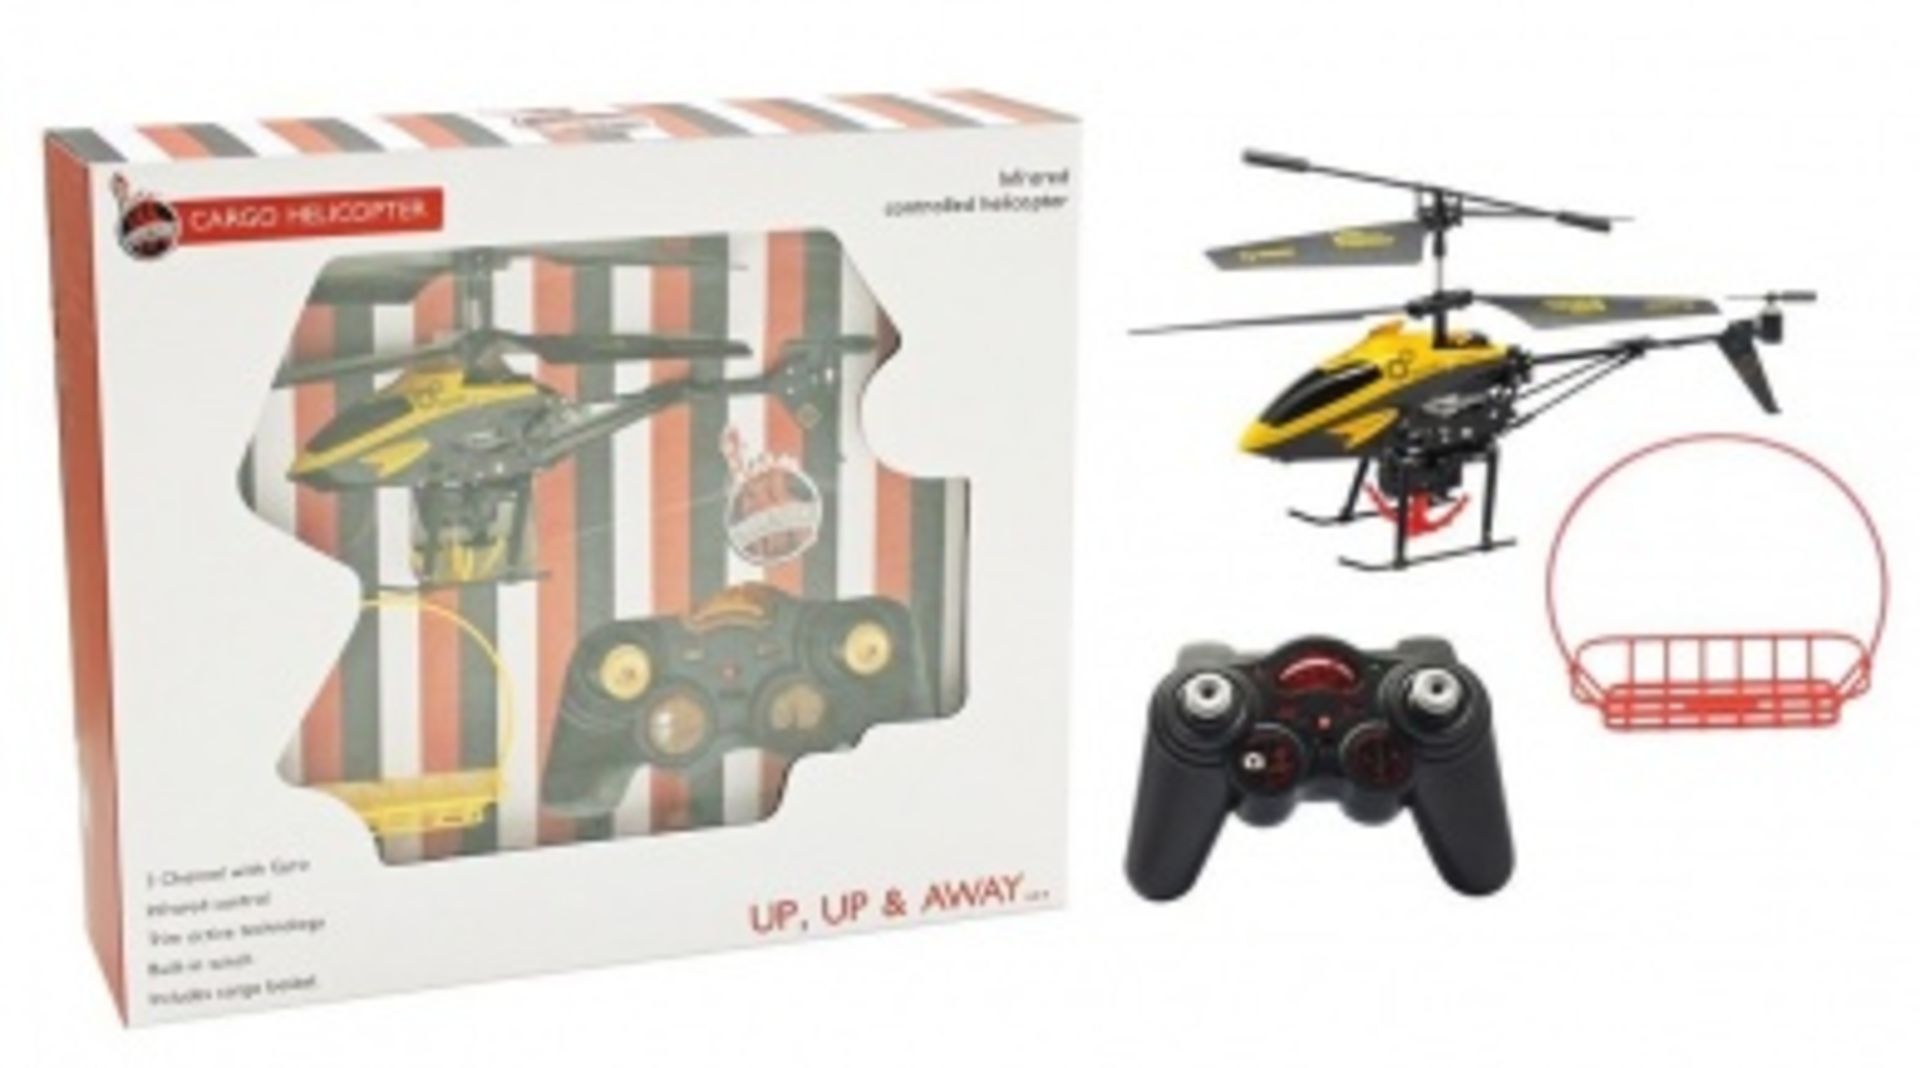 V Infrared controlled Cargo Helicopter RRP £79.99 With 3-channel gyro and trim active technology. - Image 3 of 6